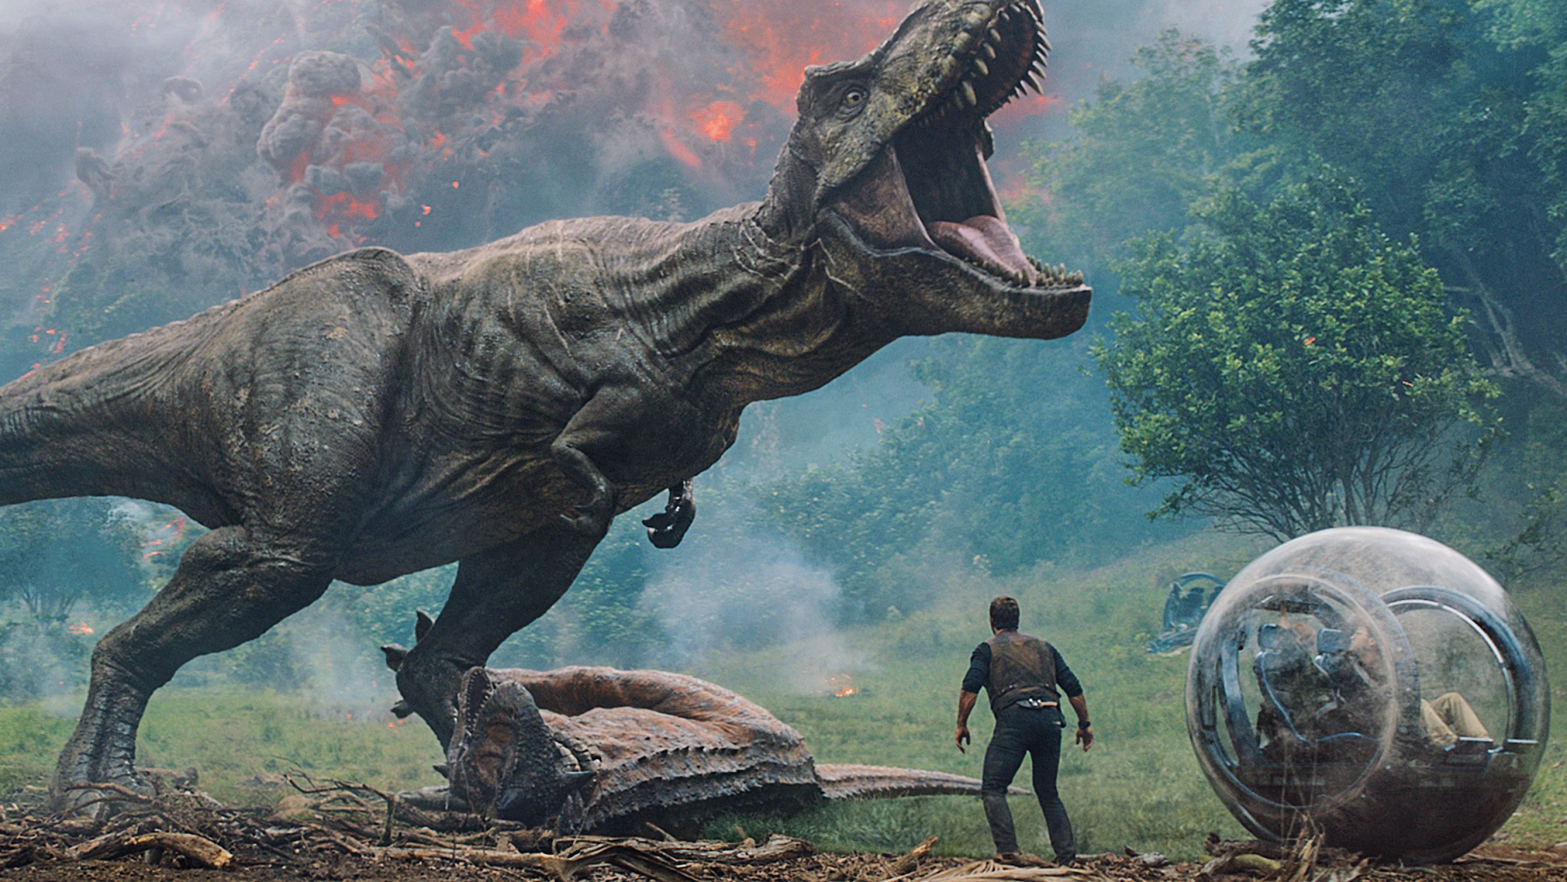 That dinosaur is ready to join society.  (Image: Universal Pictures)